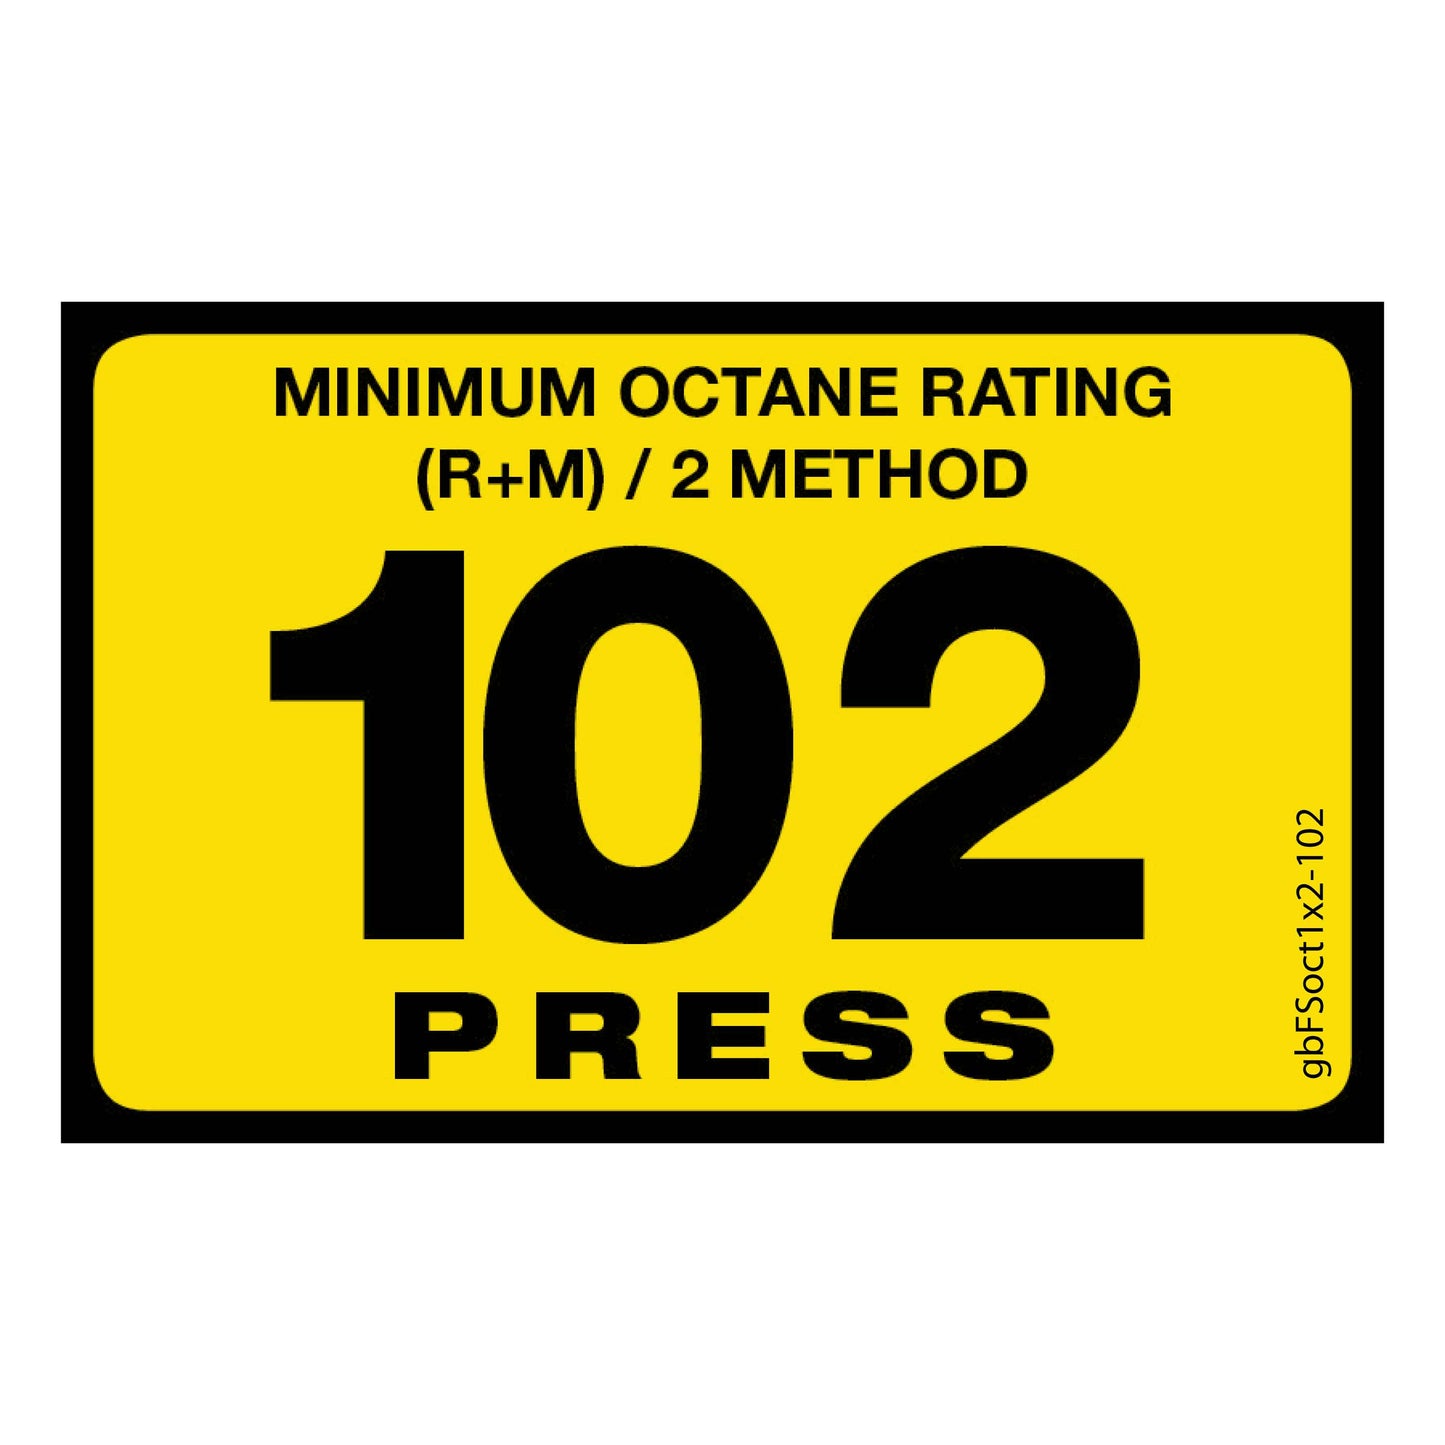 101 Press Octane Rating Decal. 1 inch by 2 inches in size. 